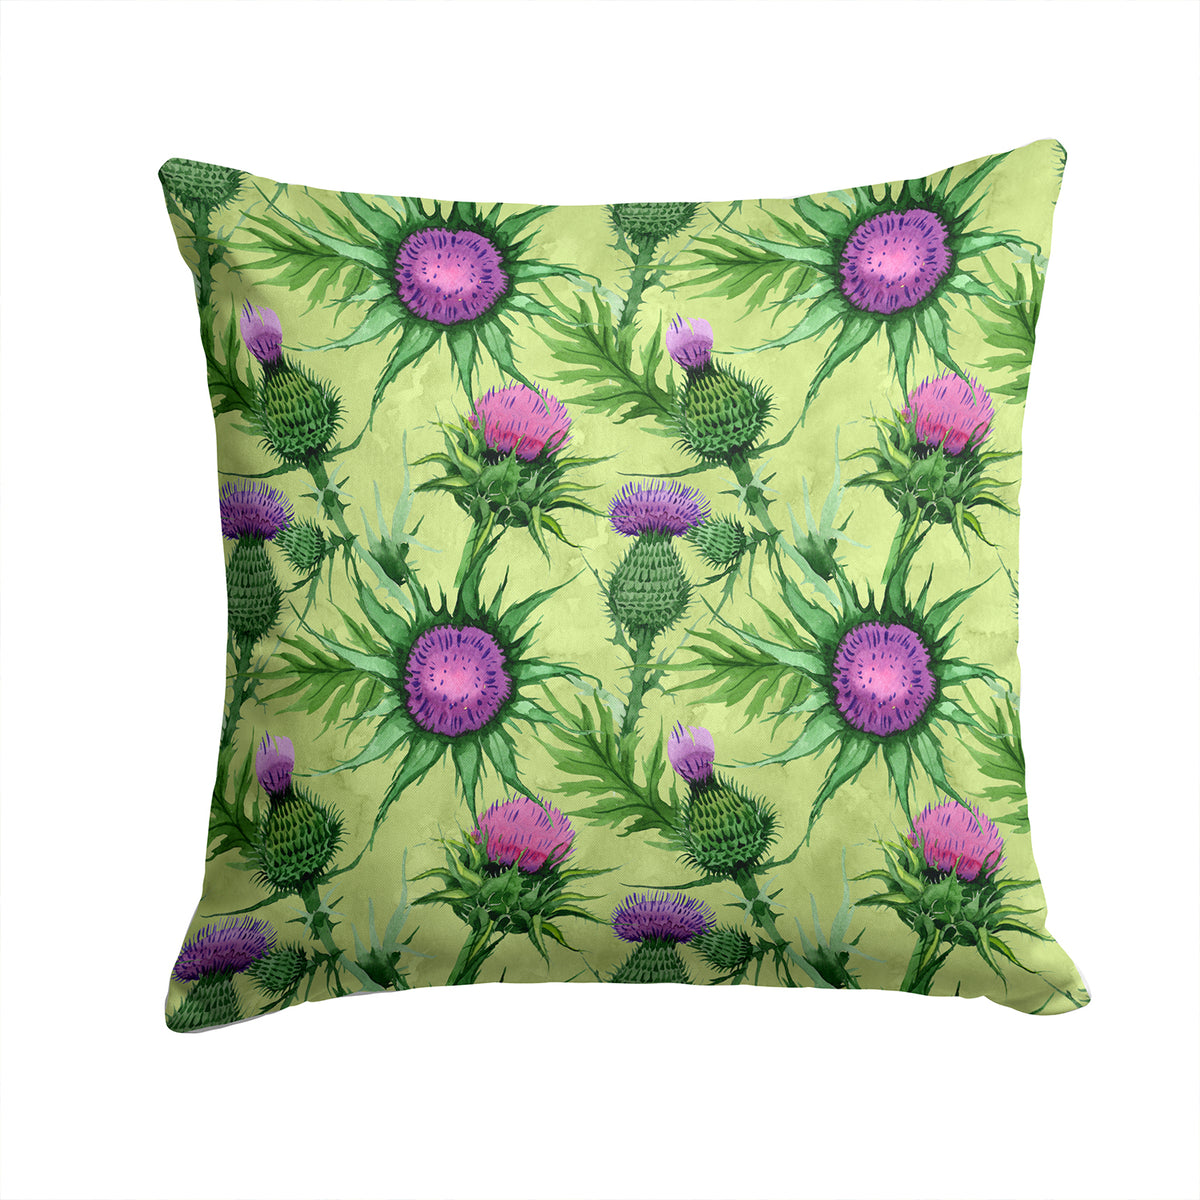 Thistle Fabric Decorative Pillow CK1699PW1414 - the-store.com